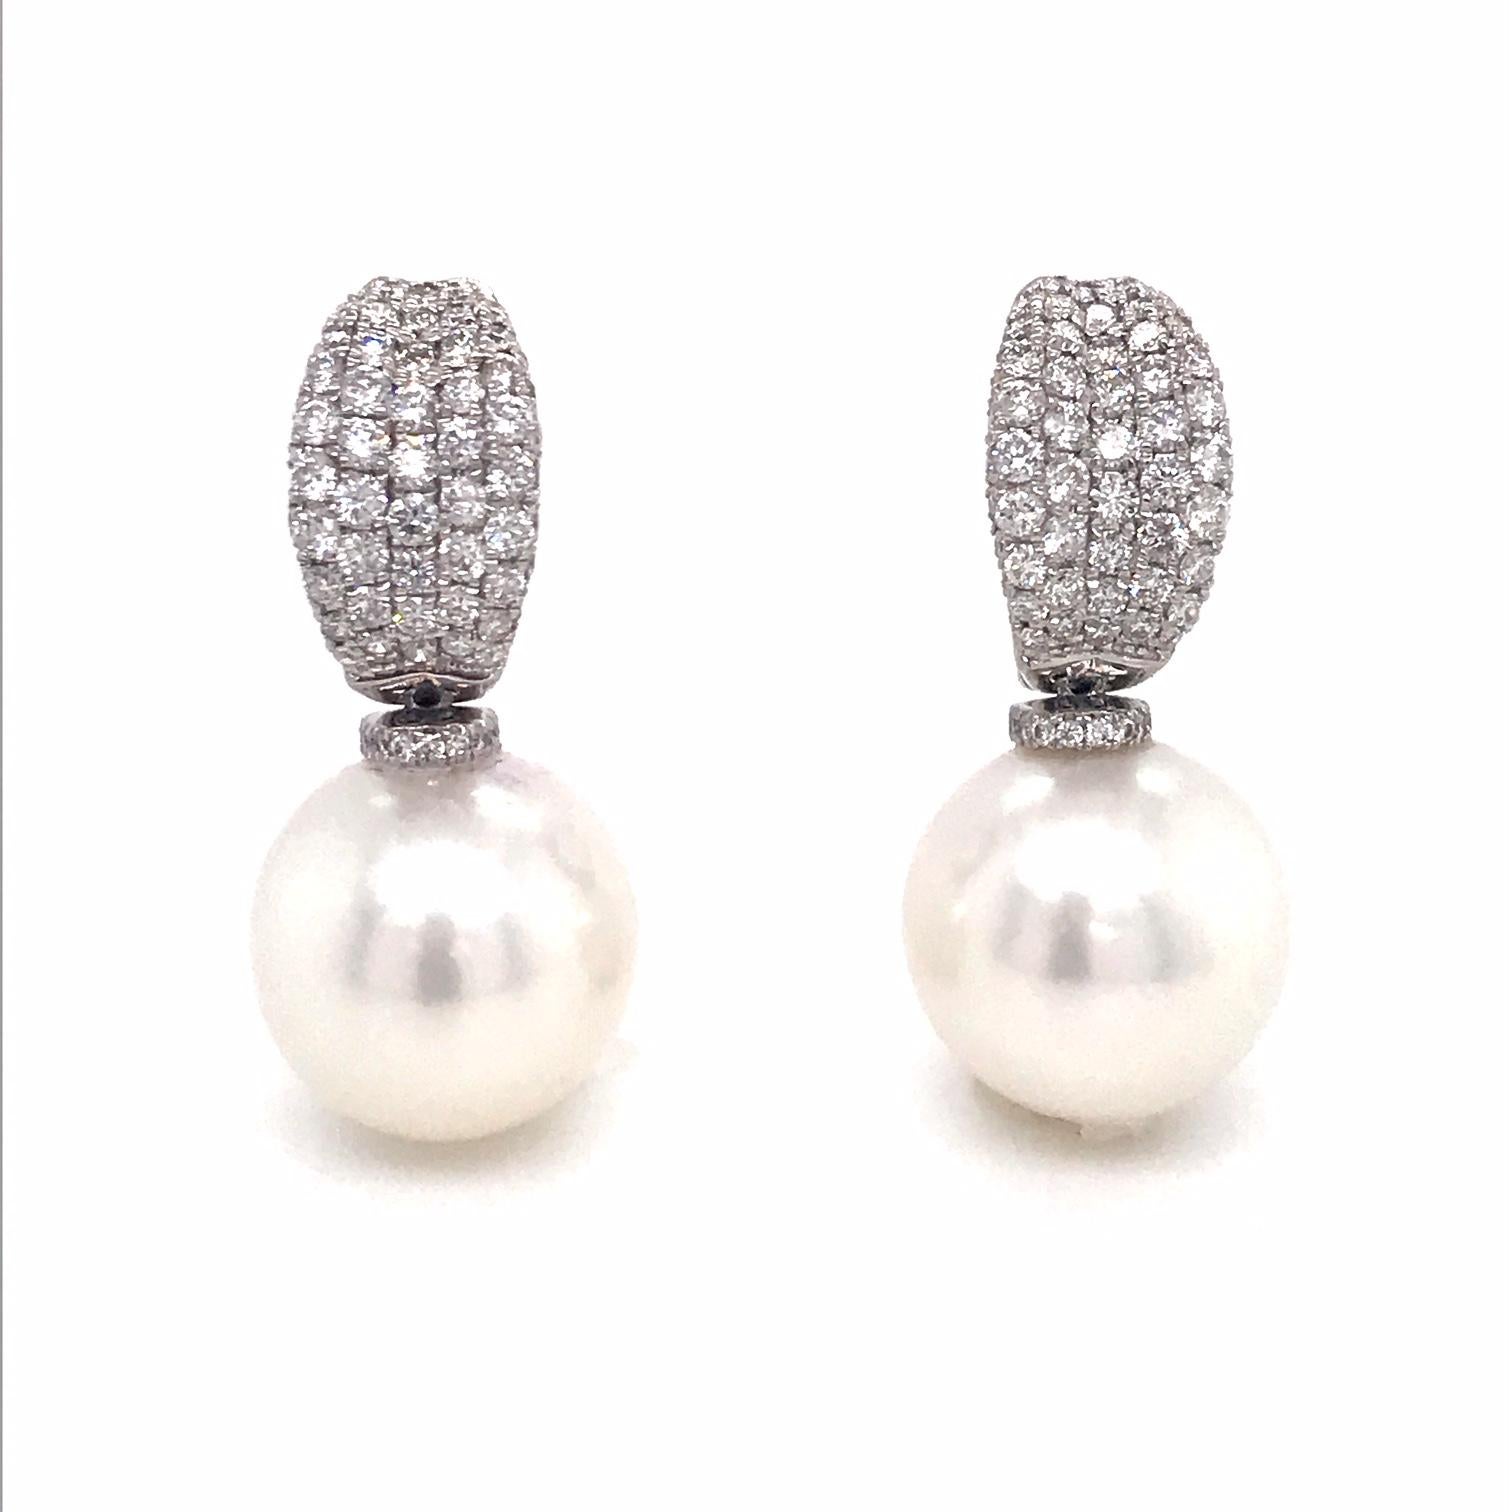 18K White gold drop earrings featuring two South Sea Pearls measuring 12-13 mm with a diamond top containing 148 round brilliants weighing 1.12 carats.
Color G-H
Clarity SI

Pearls can be changed to Tahitian, Pink or Golden Pearls upon request.